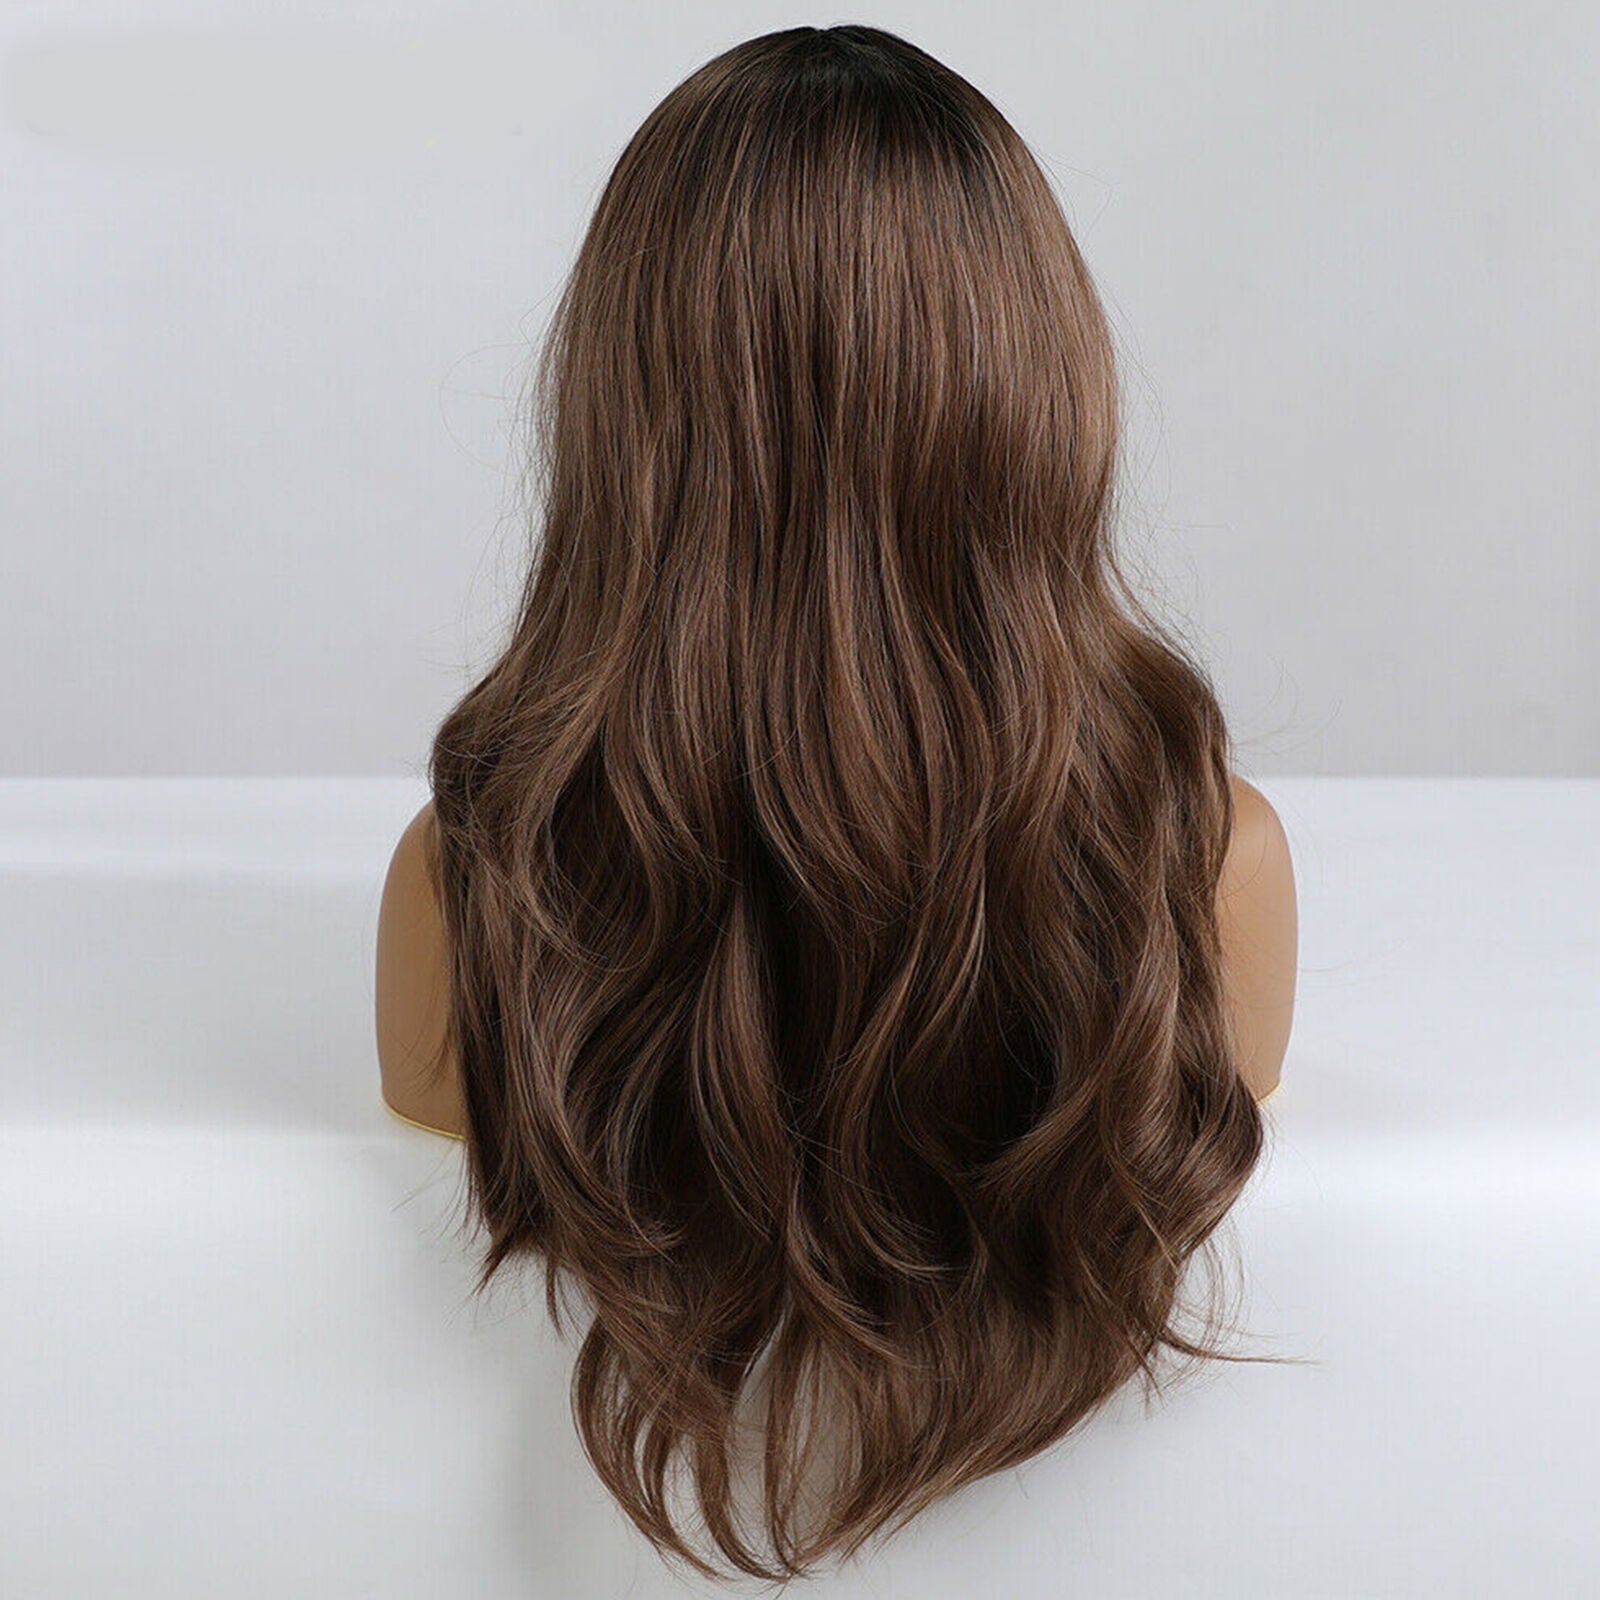 Natural Wavy Hair Wigs with Long Bangs for Women Daily Ombre Dark Brown 24 In